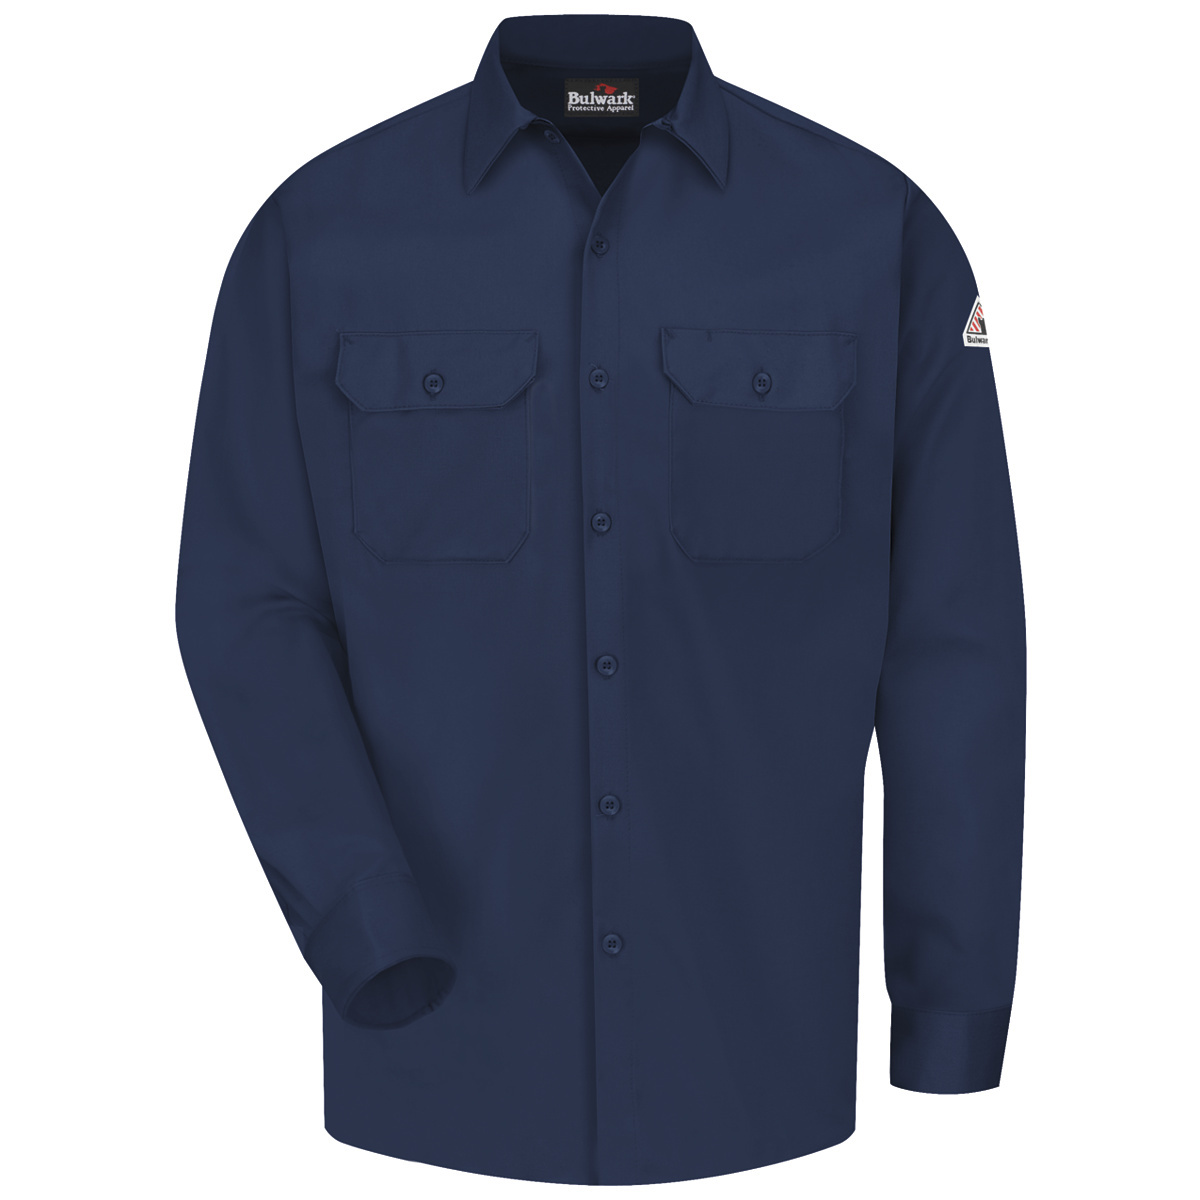 Bulwark® 5X Tall Navy Blue Westex Ultrasoft®/Cotton/Nylon Flame Resistant Work Shirt With Button Front Closure